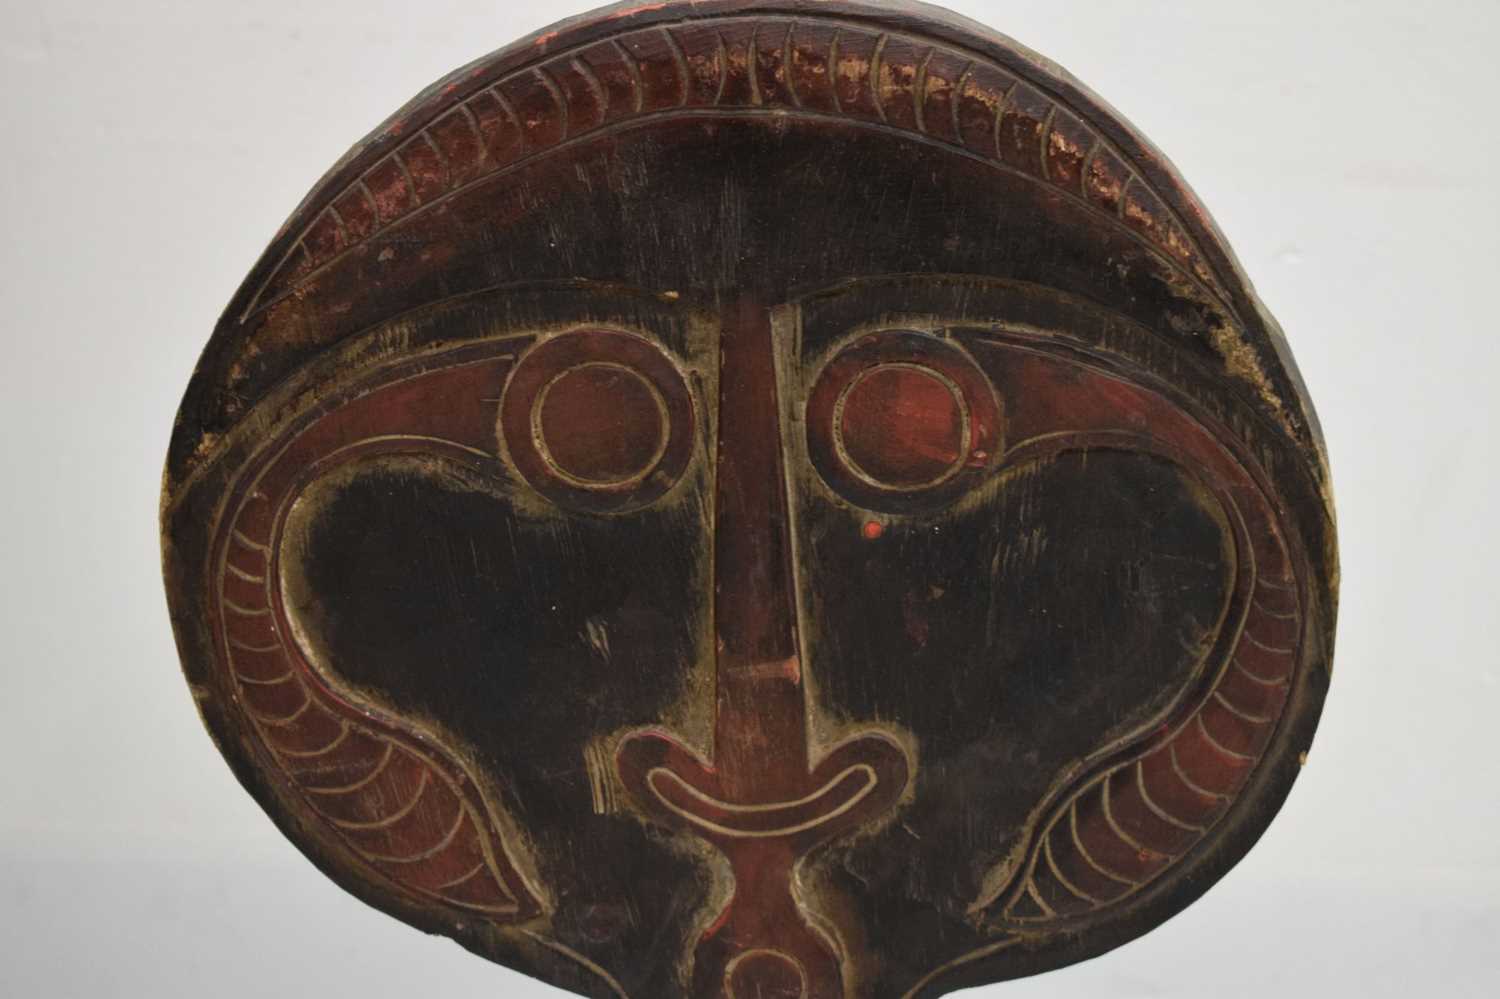 Ethnographica - Carved wooden skull hook / hanger or 'Agiba', Kerewa people, Papua New Guinea - Image 3 of 17